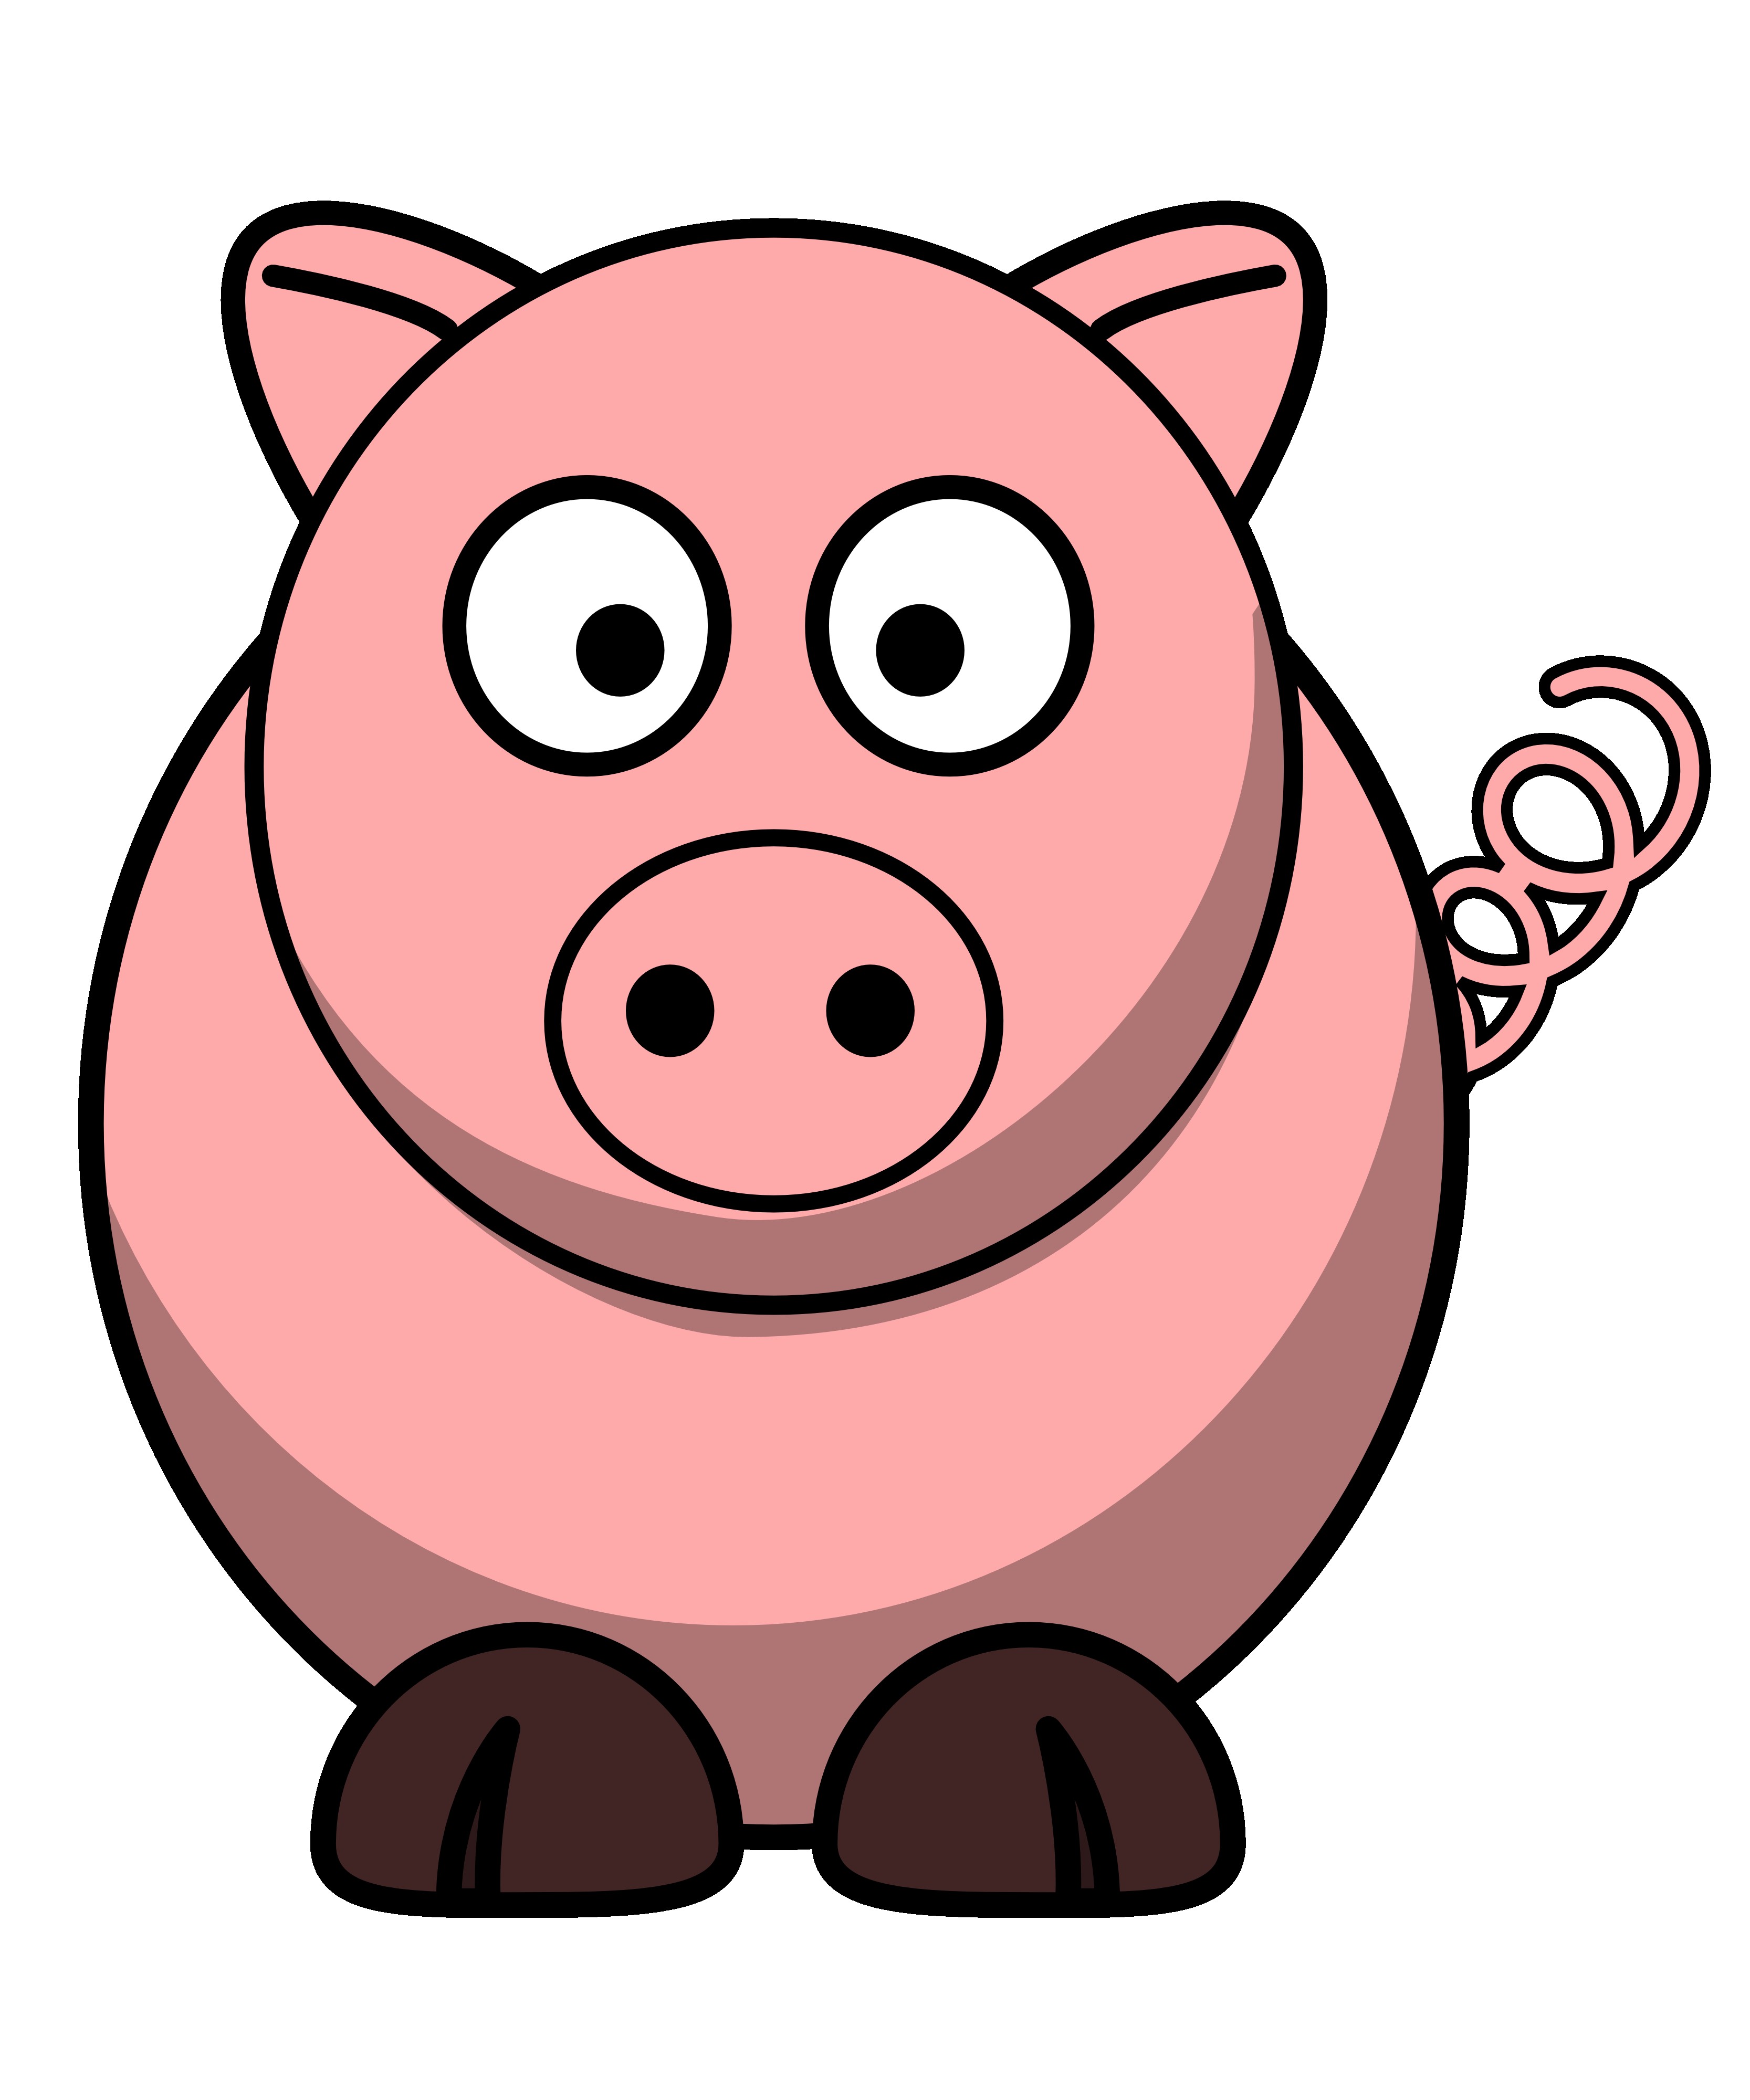 Pig clip art pictures free clipart images